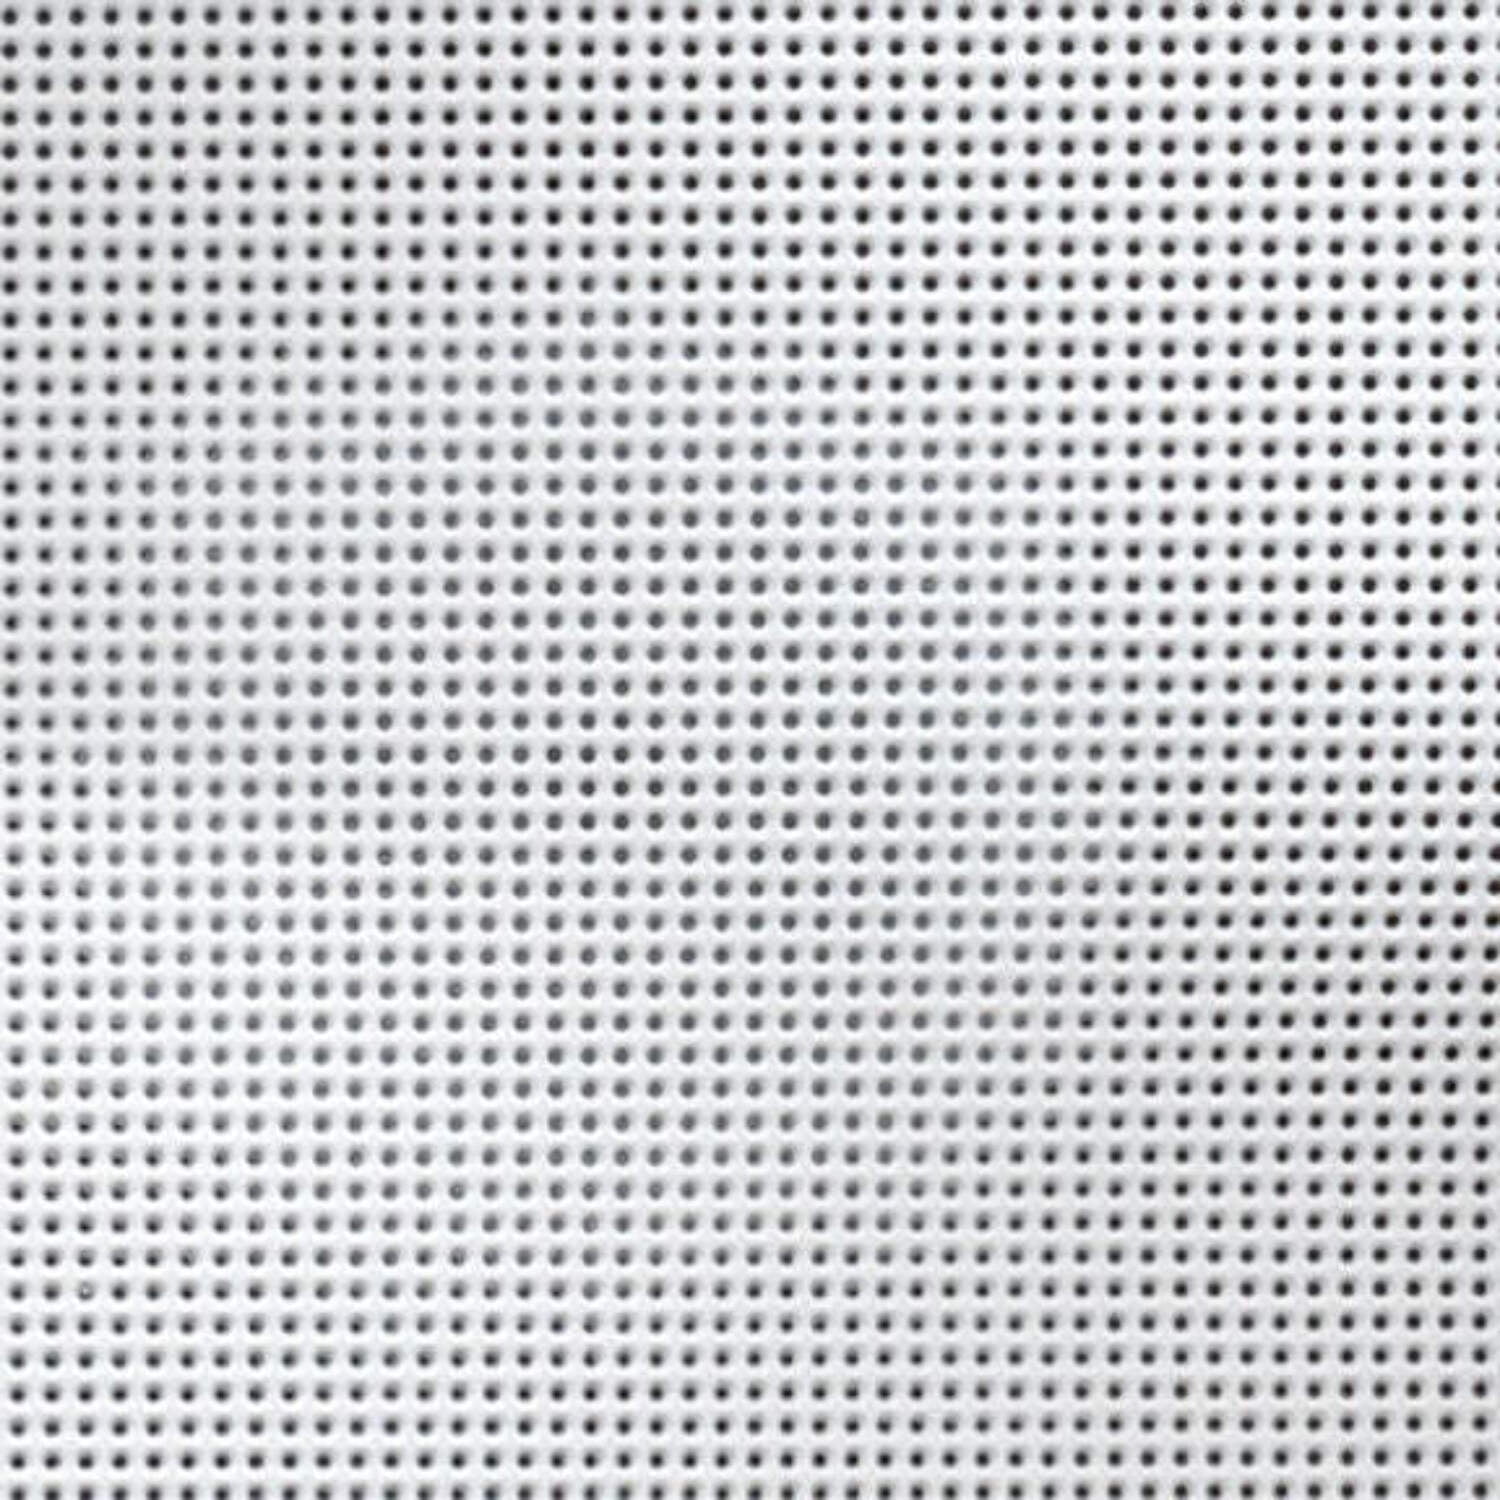 14-Mesh Perforated Plastic Canvas Sheets, Hobby Lobby